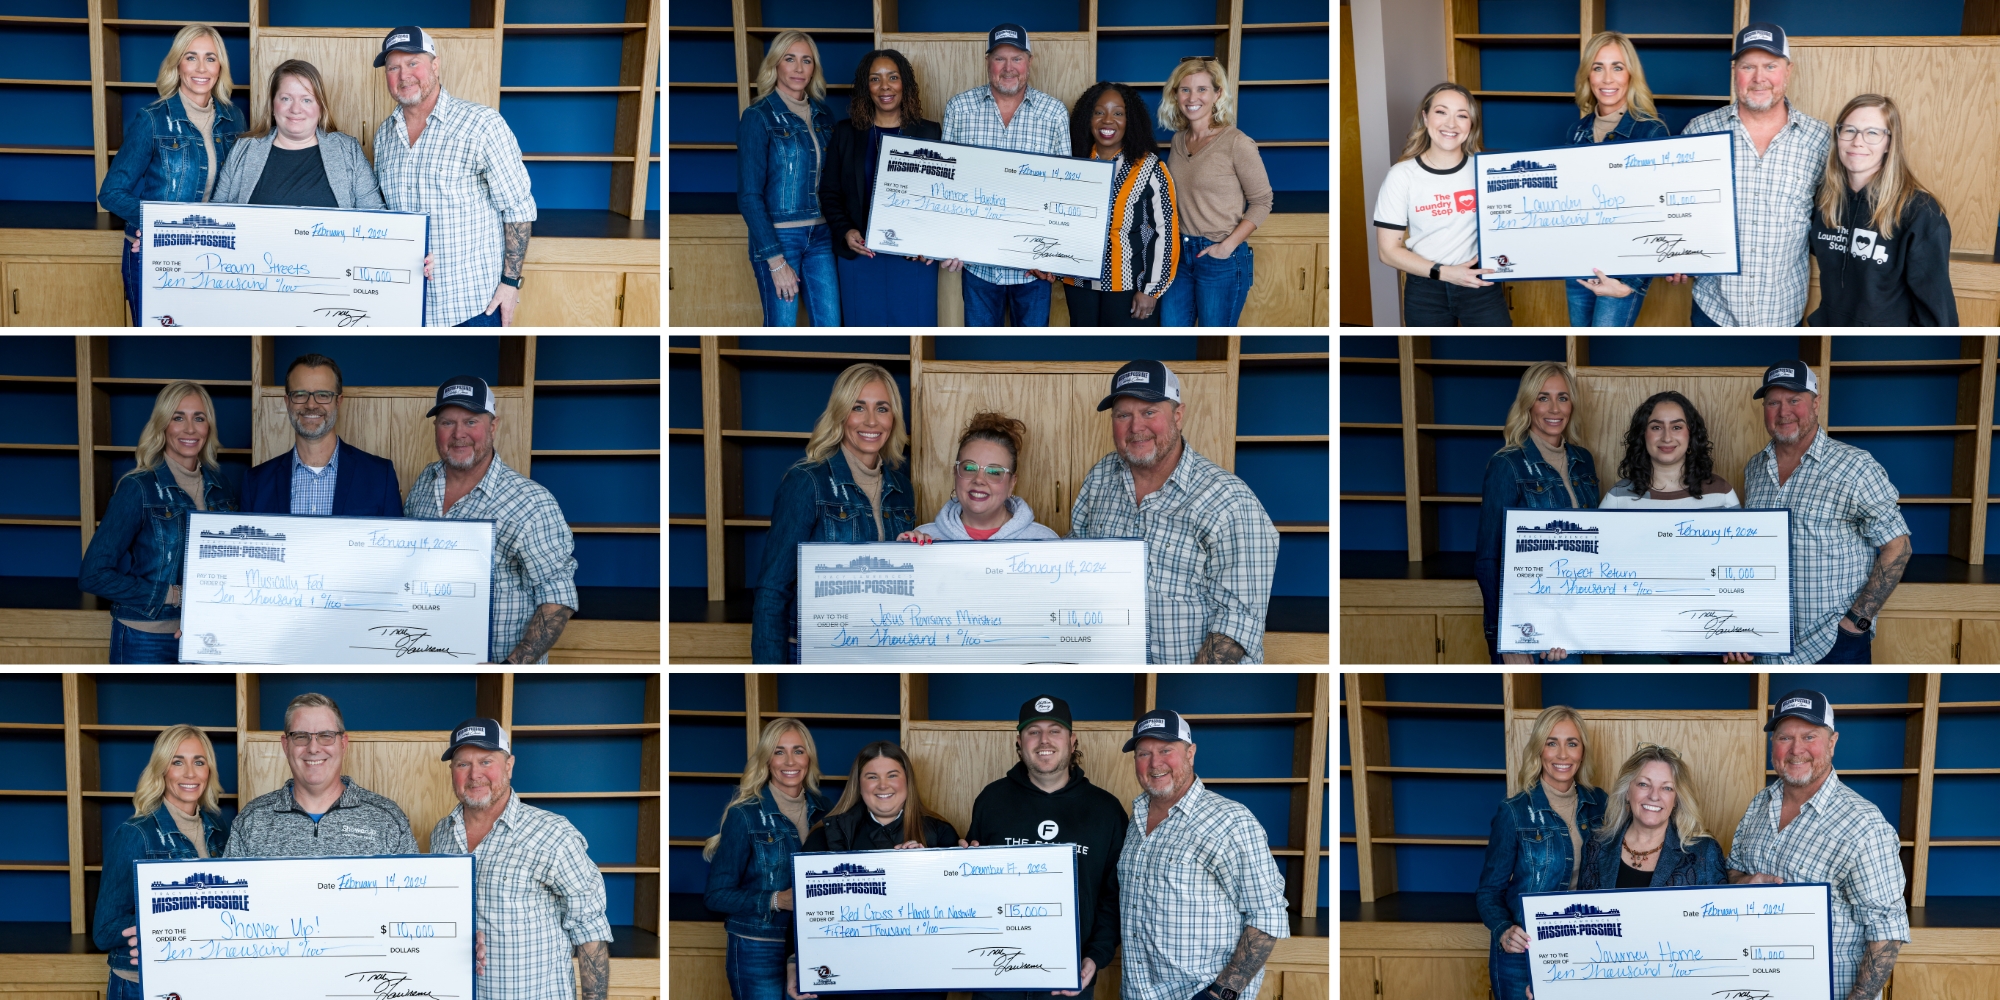 TRACY LAWRENCE DONATES $345K TO LOCAL ORGANIZATIONS COMMITTED TO HELPING THE HOMELESS AND HUNGRY, TOTALING OVER $2.8M SINCE MISSION:POSSIBLE’S INCEPTION